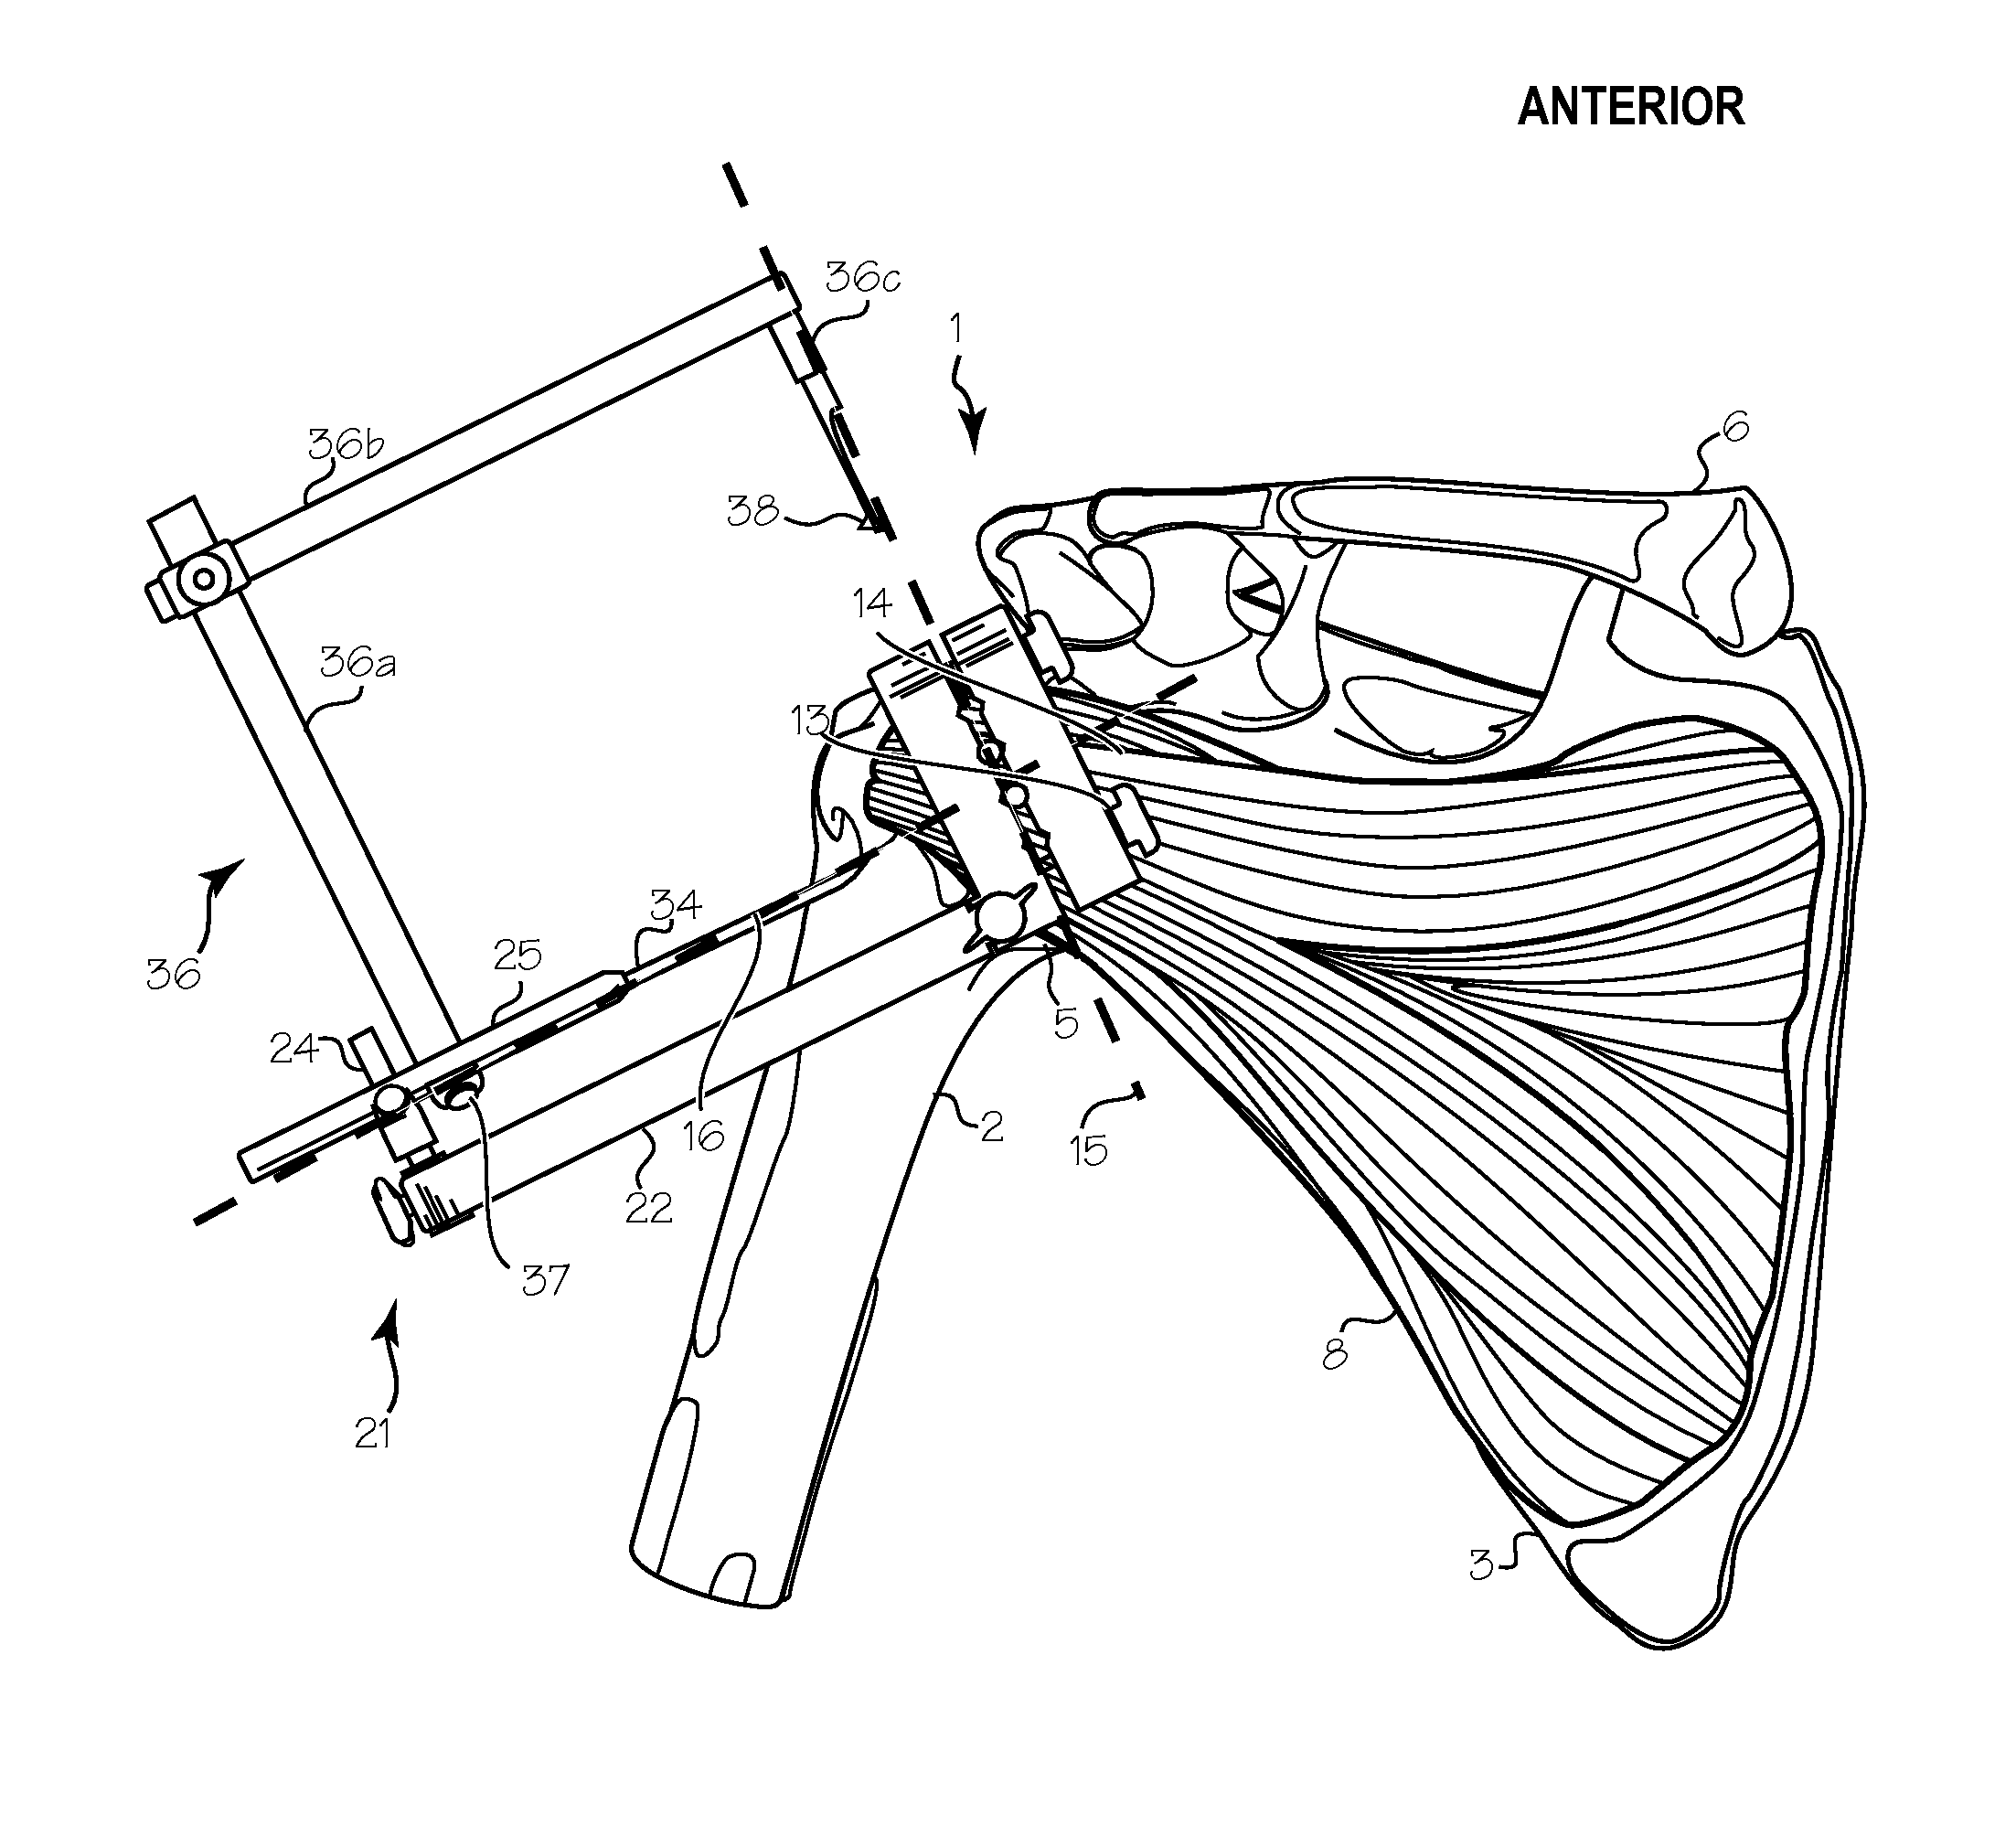 Method of humeral head resurfacing and/or replacement and system for accomplishing the method